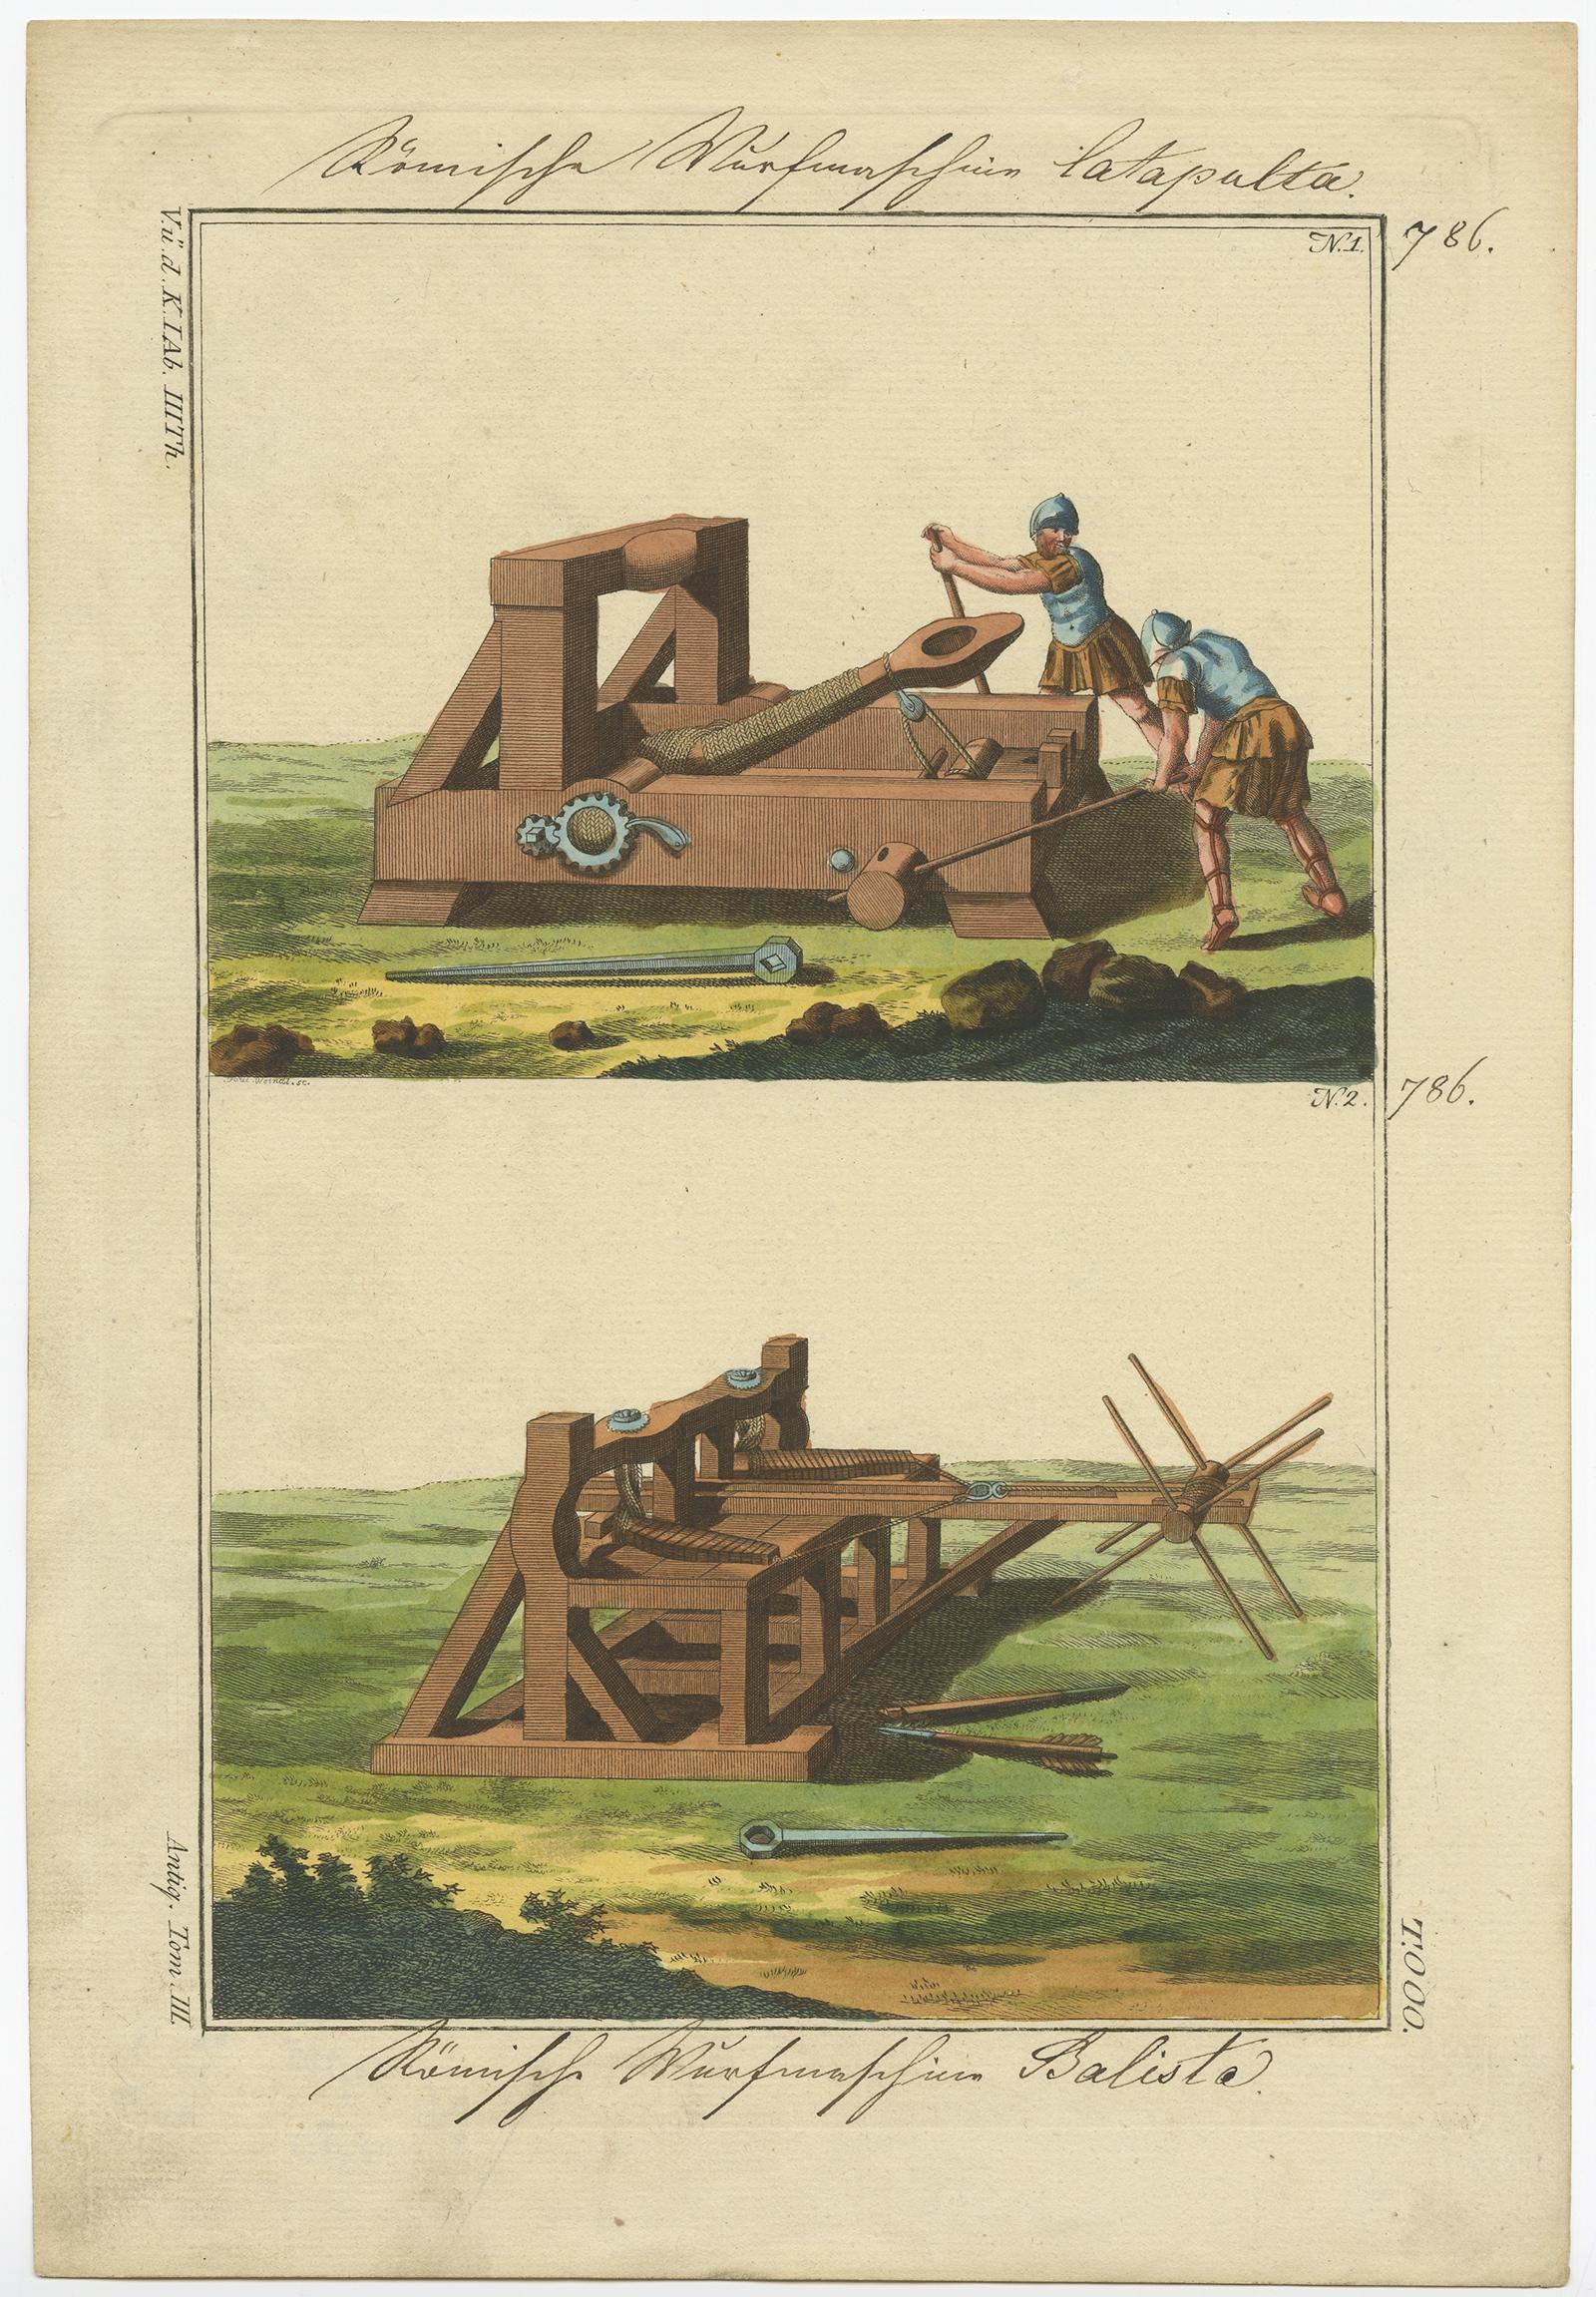 Untitled print of a Roman catapult and ballista. 

This print originates from 'Historical Picture of the Costumes of the Principal People of Antiquity and of the Middle Ages' by R. von Spalart.

Artists and engravers: Author: R. von Spalart.